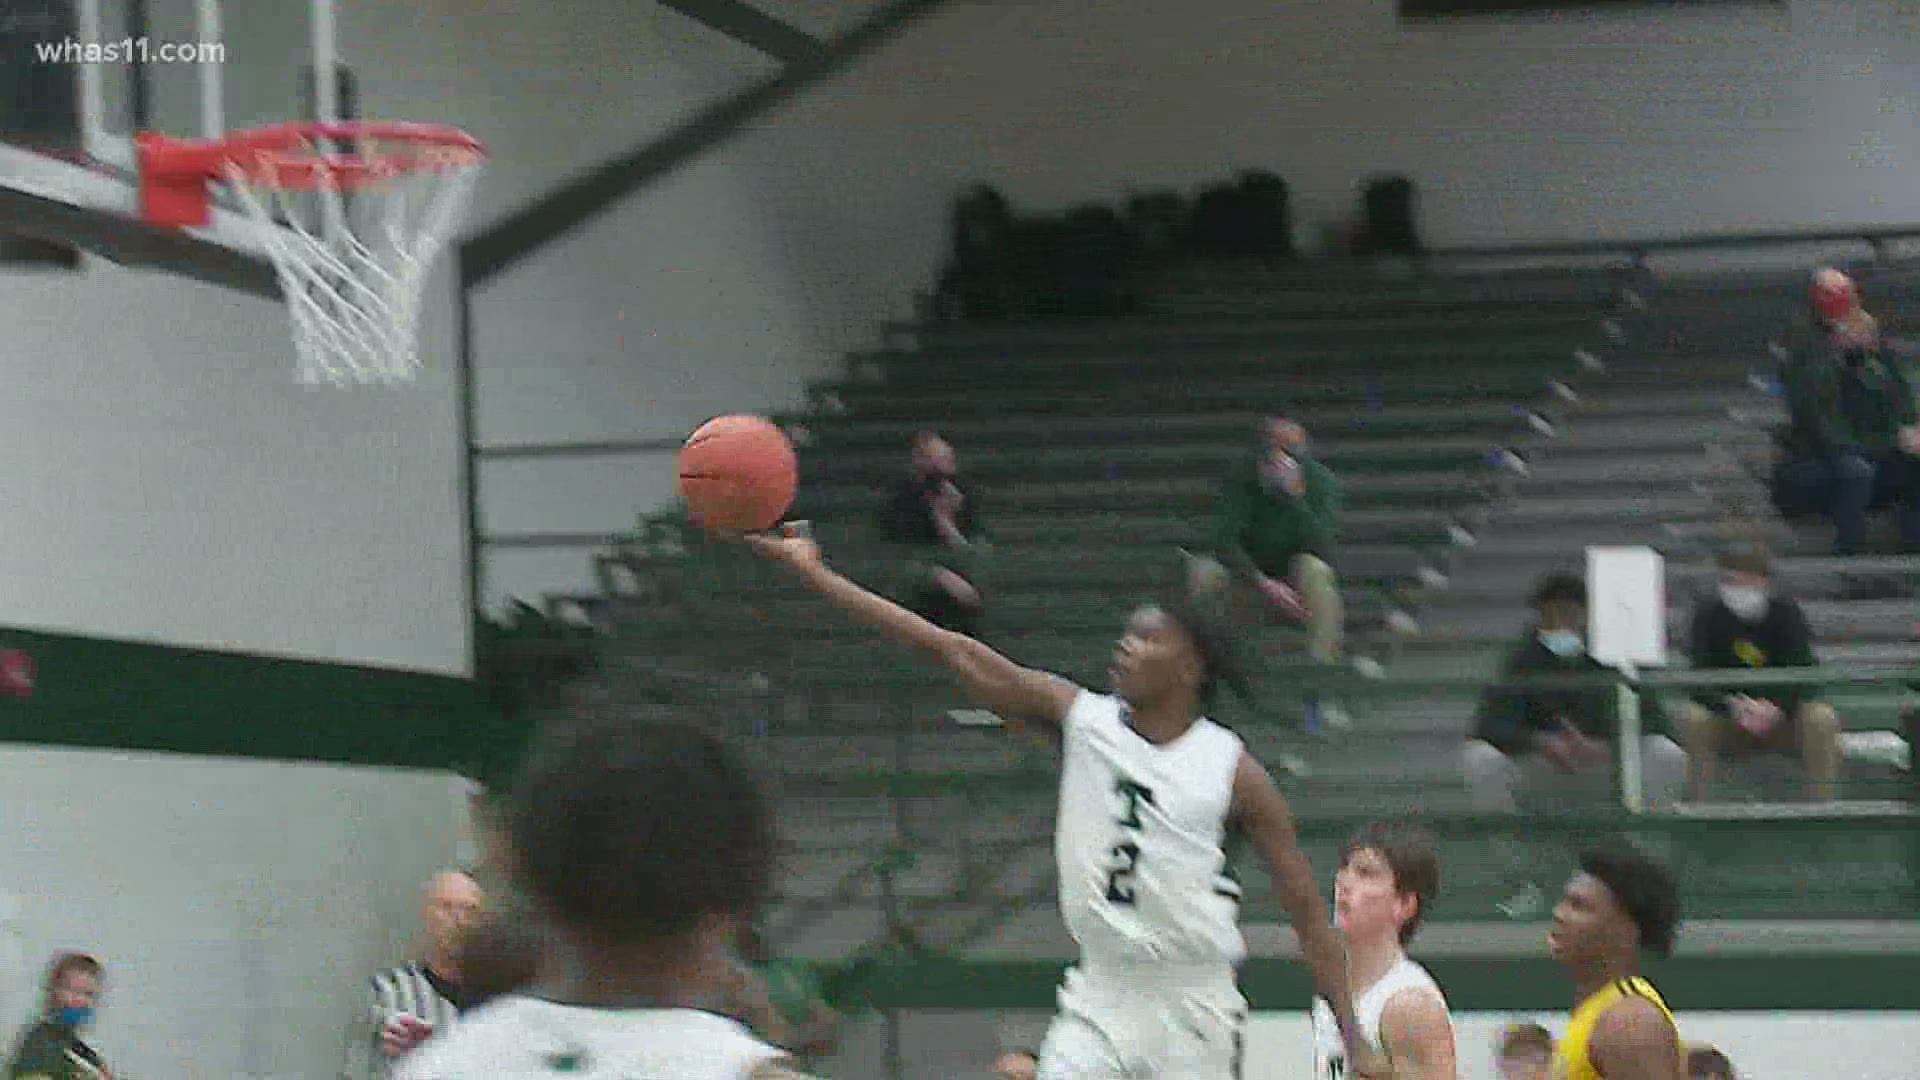 The rivals faced off Tuesday night with the Tigers beating the 'Rocks 62-54.